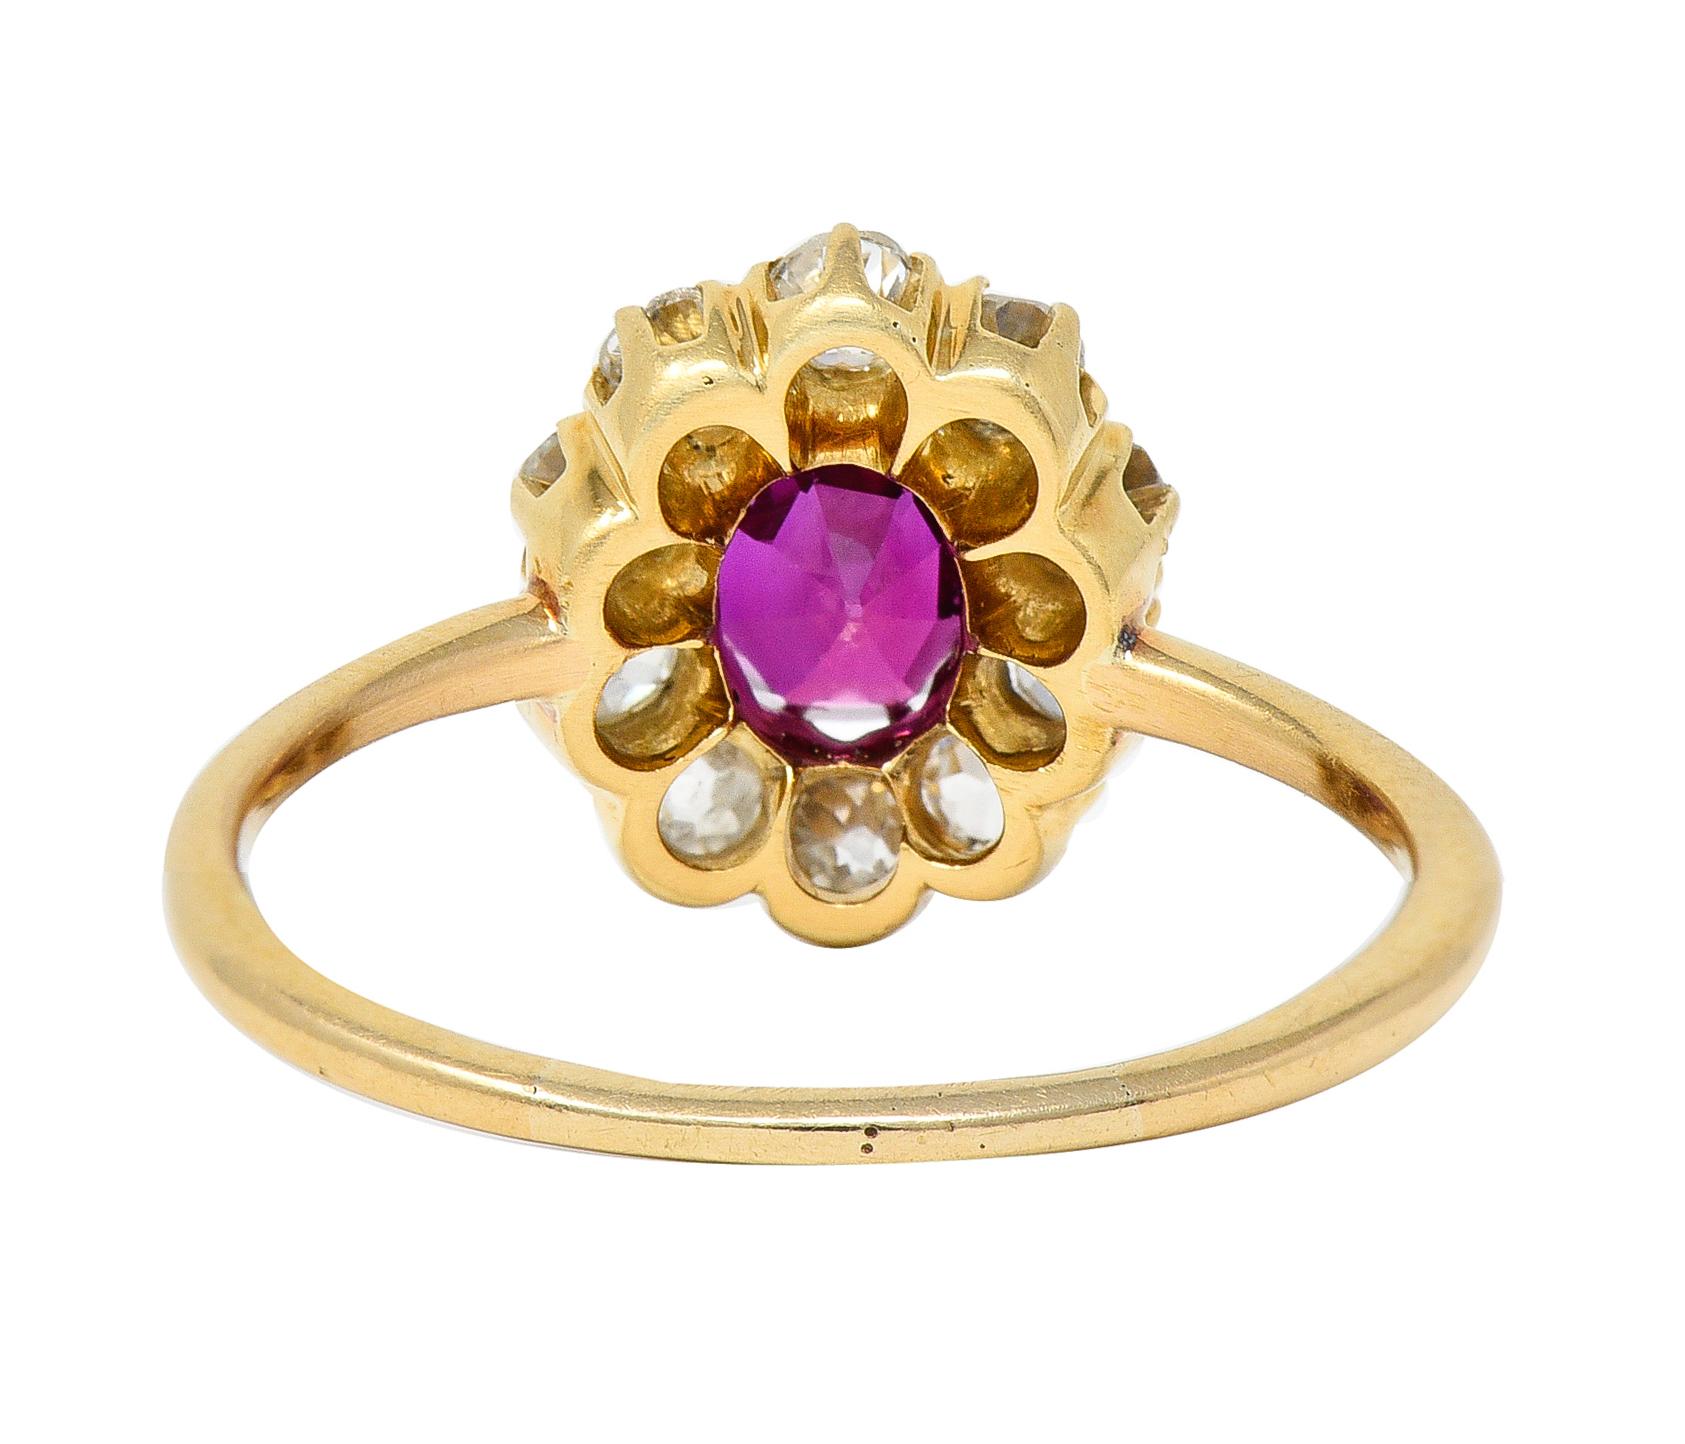 Victorian 1.82 Carats Ruby Diamond 14 Karat Yellow Gold Antique Cluster Ring In Excellent Condition For Sale In Philadelphia, PA